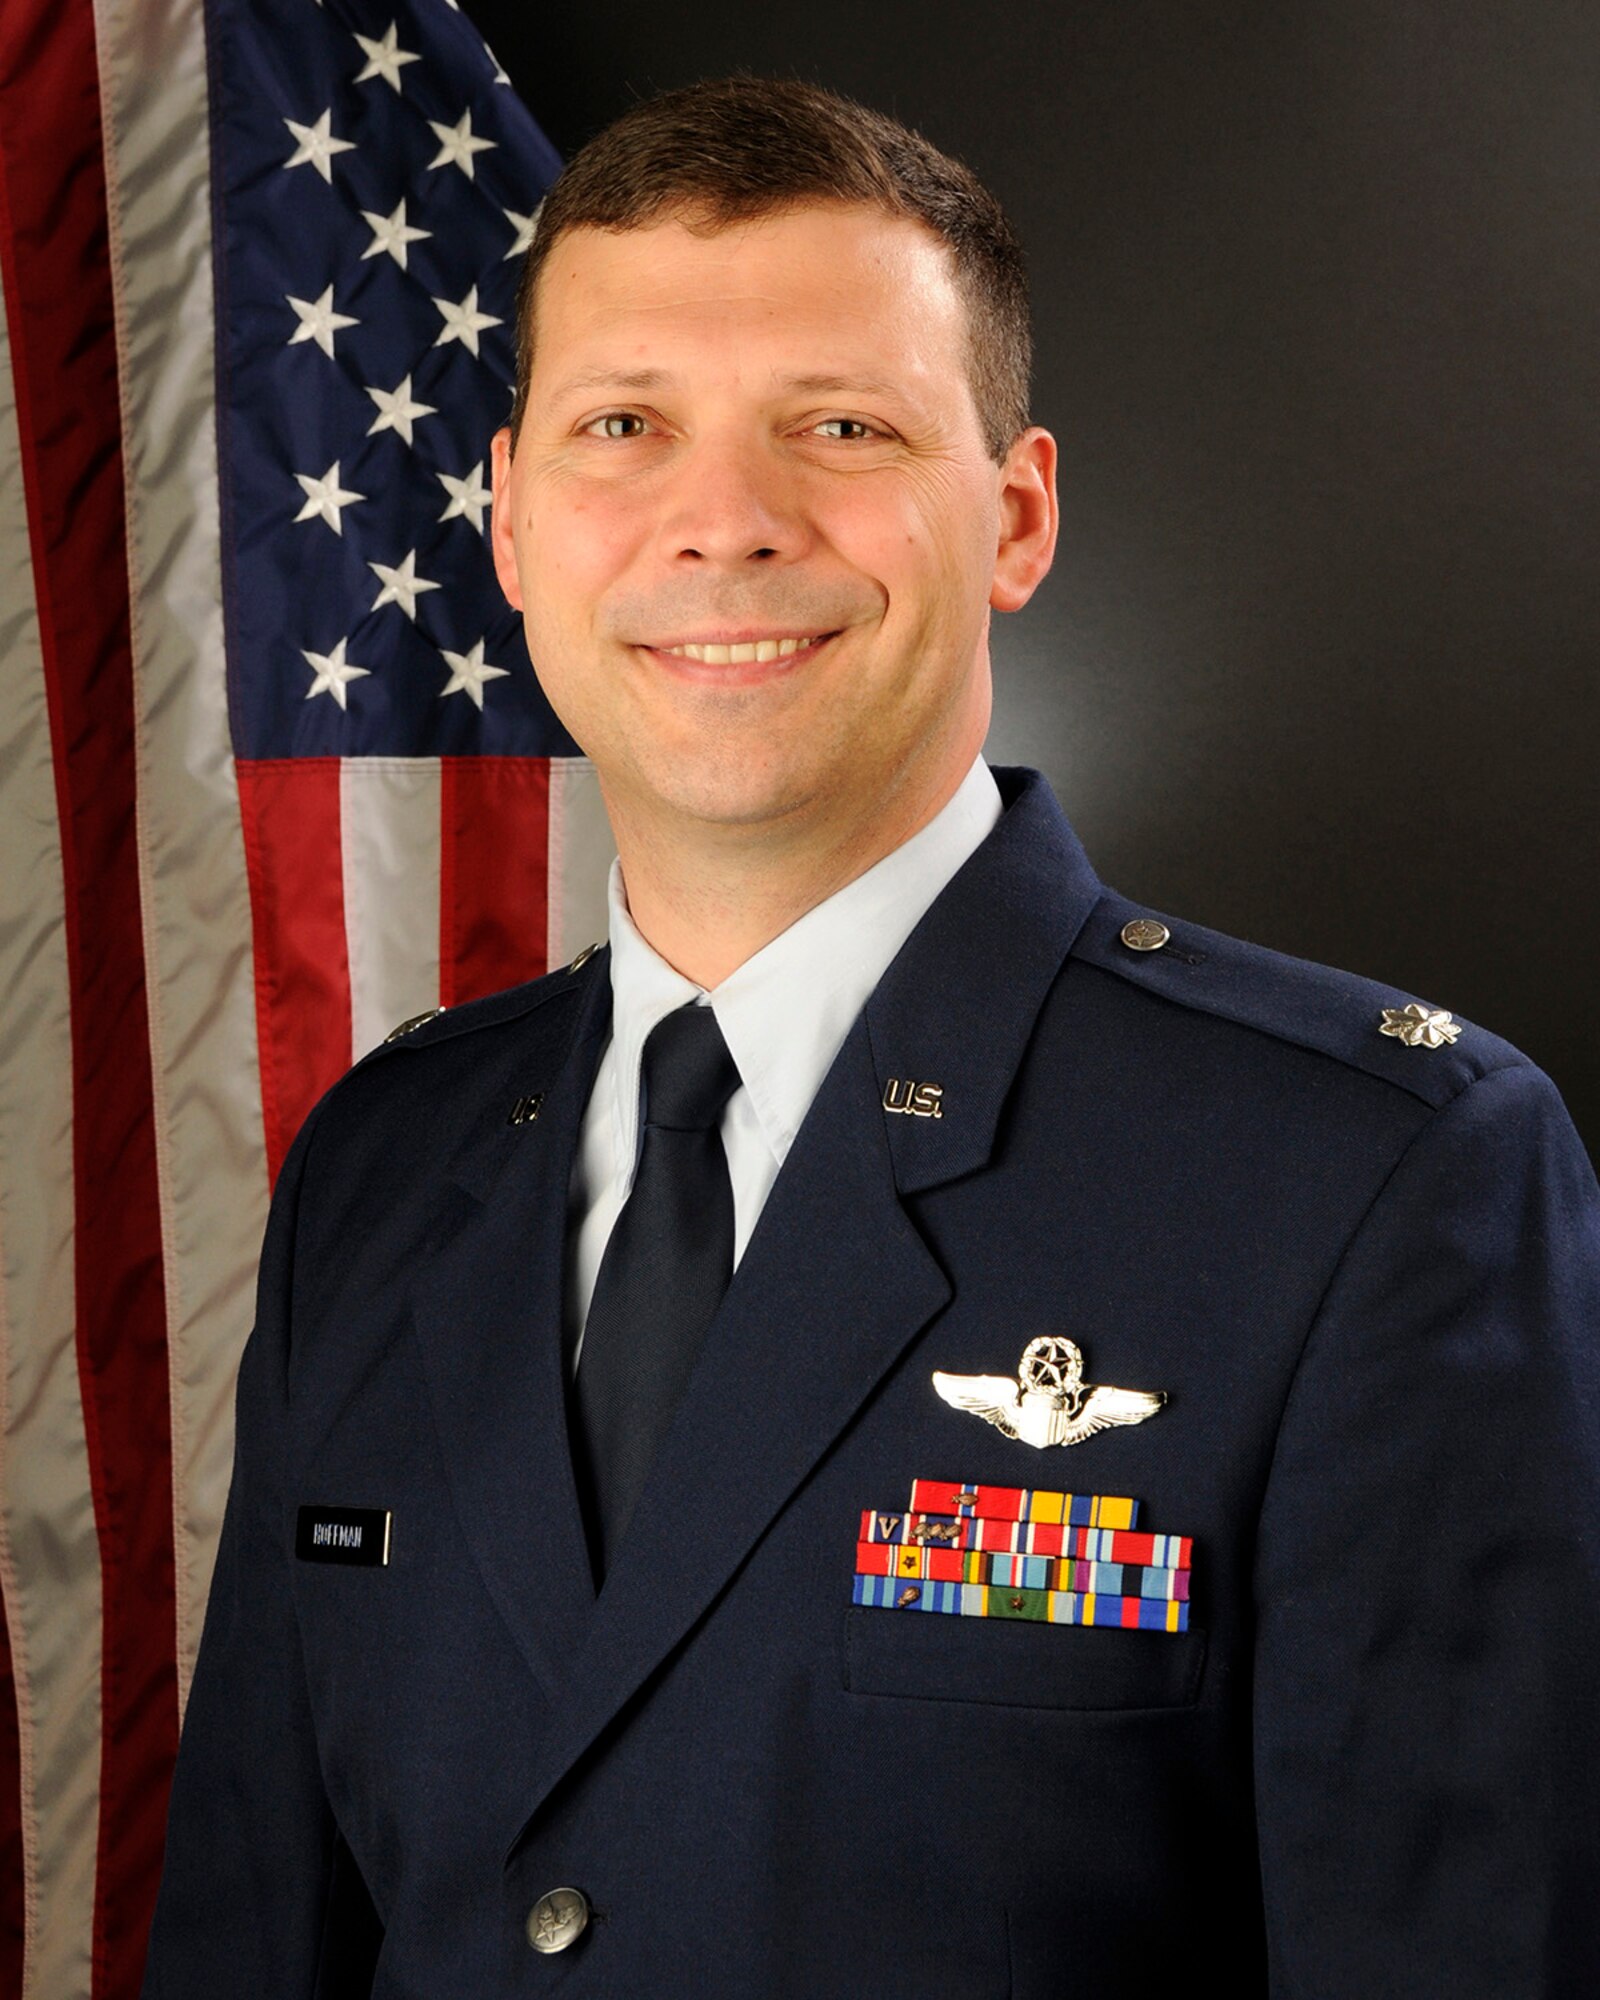 U.S. Air Force Lt. Col. Erik Hoffman, commander of Detachment 157 of the 495th Fighter Group, 169th Fighter Wing at McEntire Joint National Guard Base, S.C., June 12, 2014. (U.S. Air National Guard photo by Senior Master Sgt. Edward Snyder/Released)